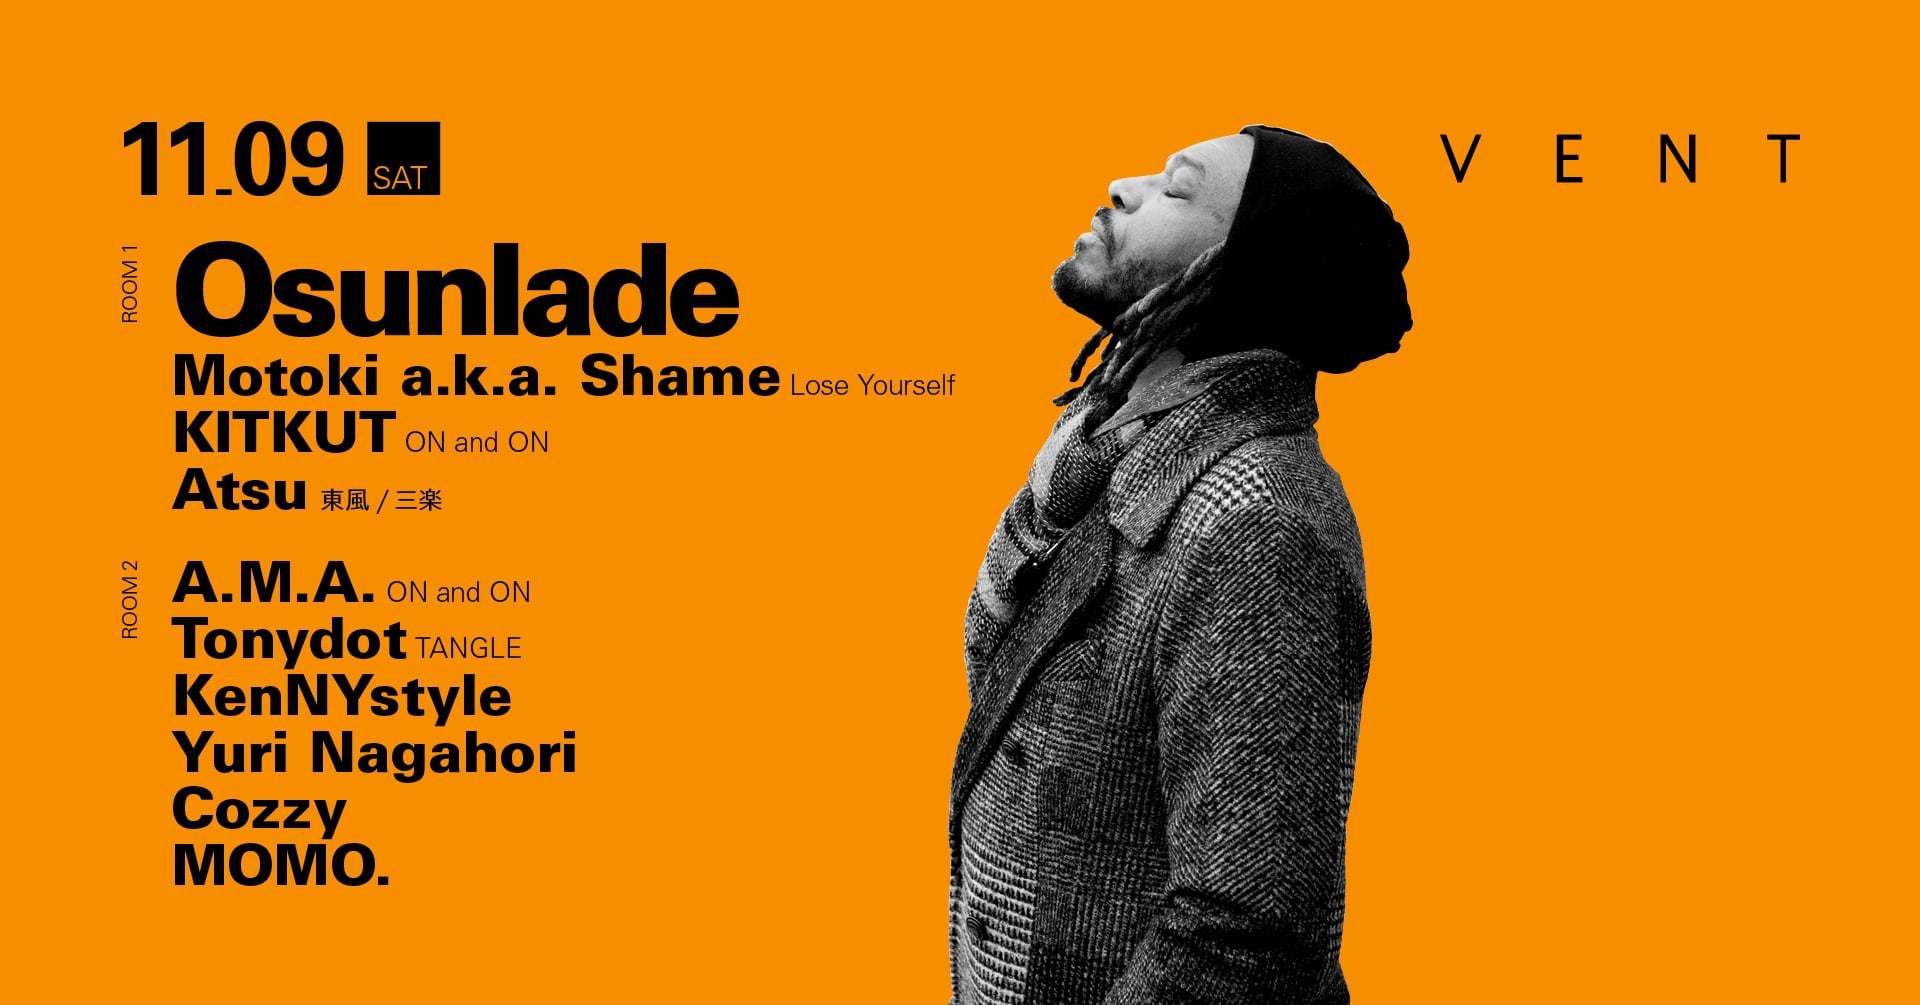 Osunlade will be making his first appearance at nightclub VENT Omotesando